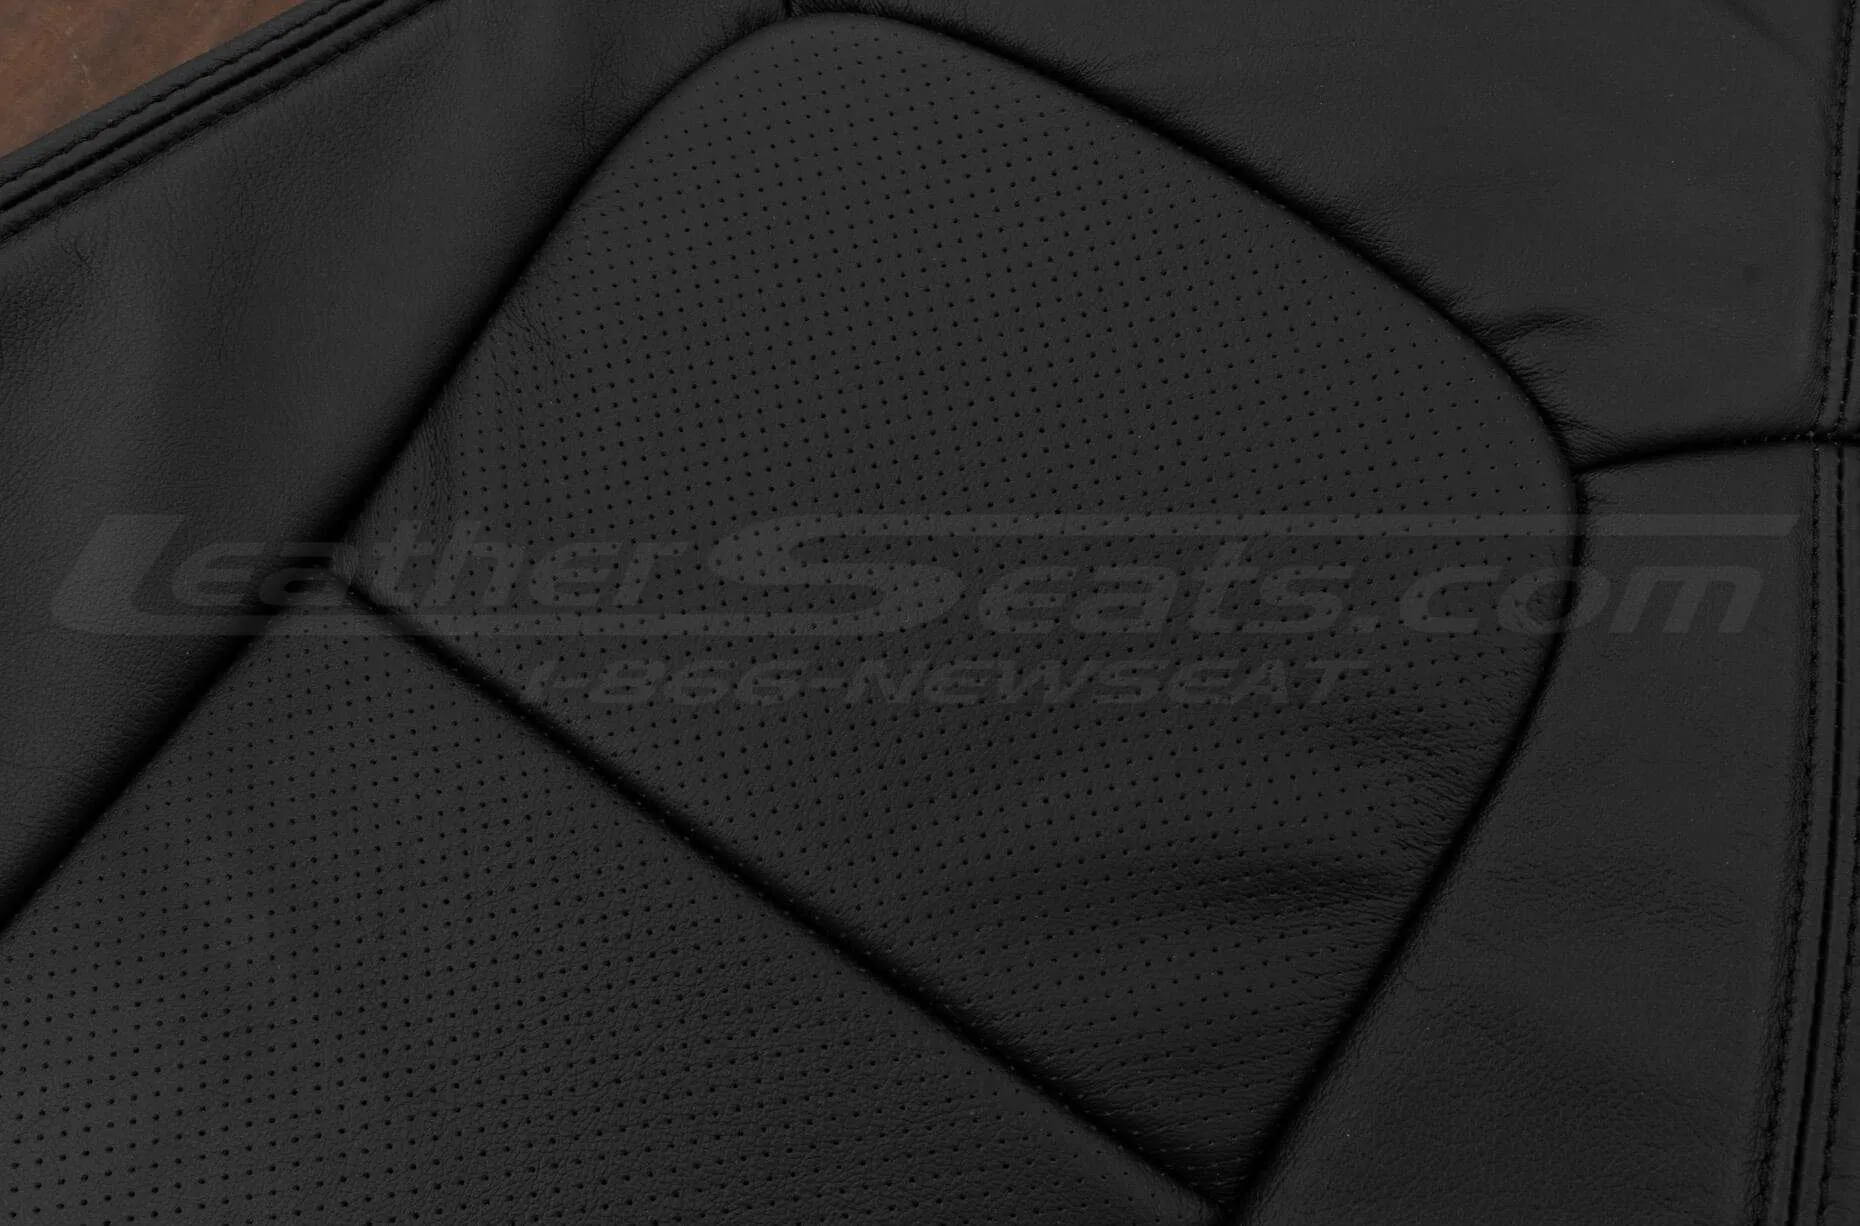 Leather texture/Perforated Insert section of leather backrest upholstery